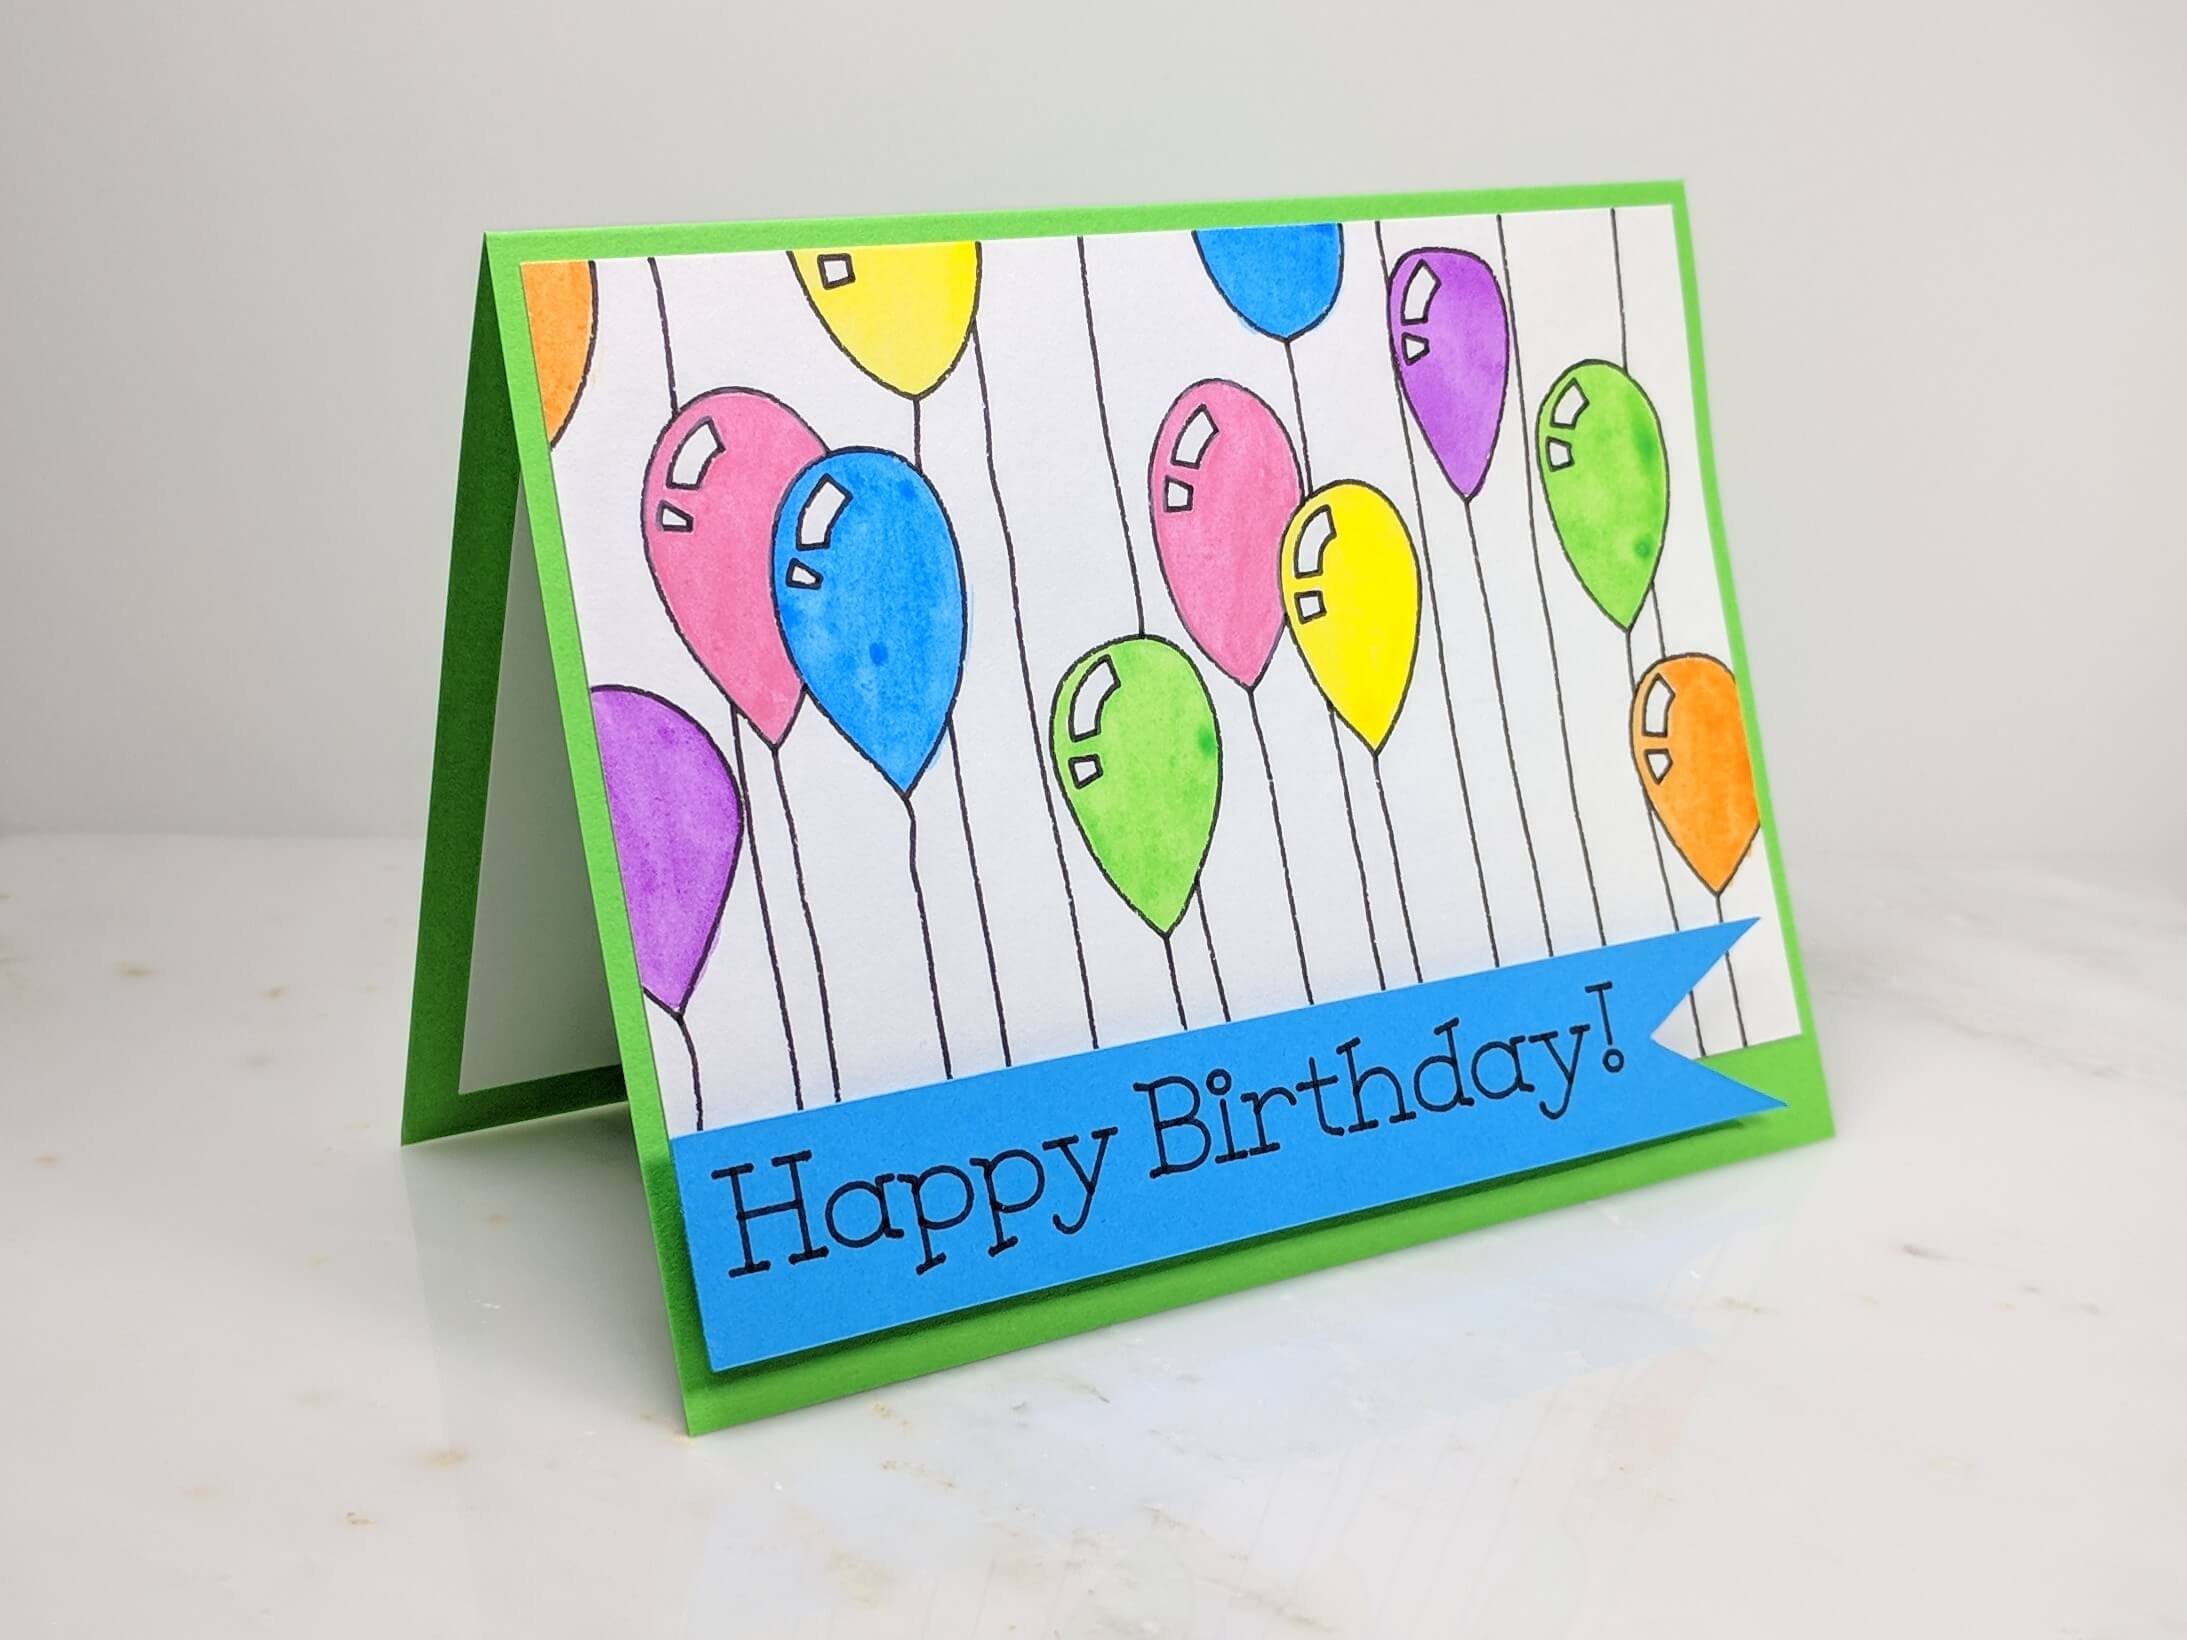 Birthday Card drawing ideas |How to make birthday card|Handmade birthday  greeting card making ideas - YouTube